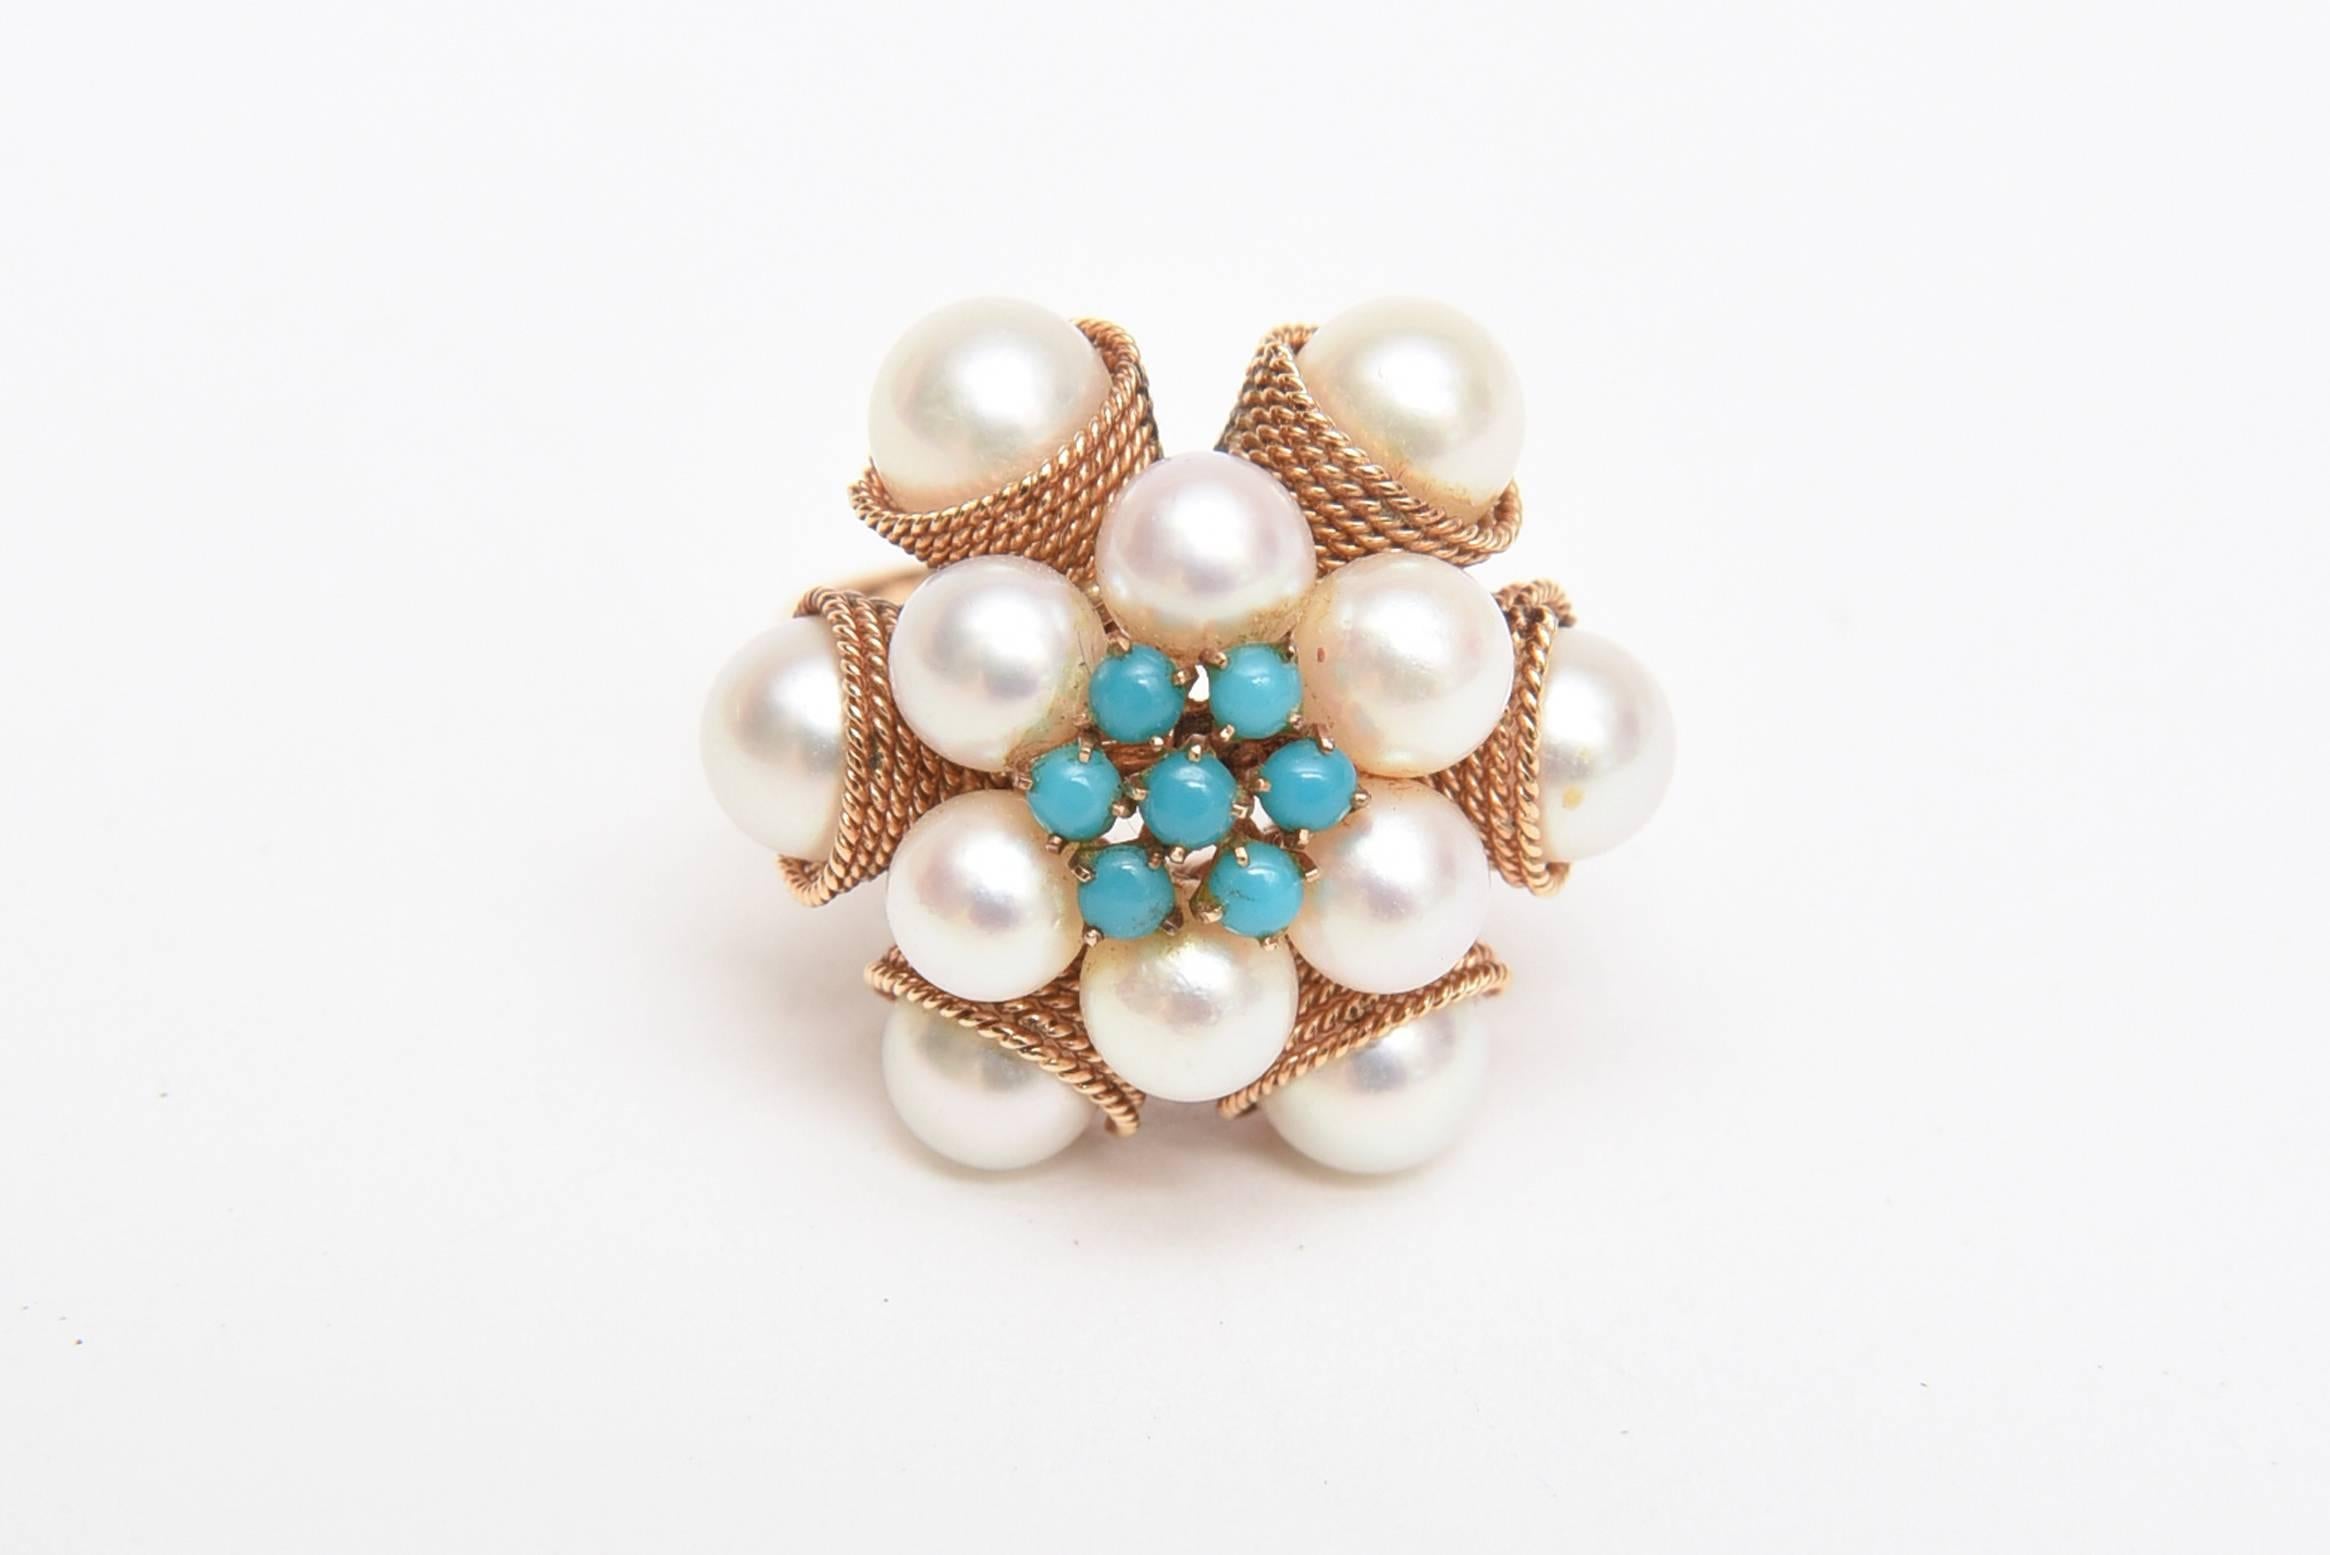 This lovely and elegant 14K dome vintage cocktail ring consists of 12 cultured pearls and 7 turquoise cabochon stones that are prong set. The larger pearls are encased in a beautiful line banded setting of 14 K yellow gold and the other pearls are